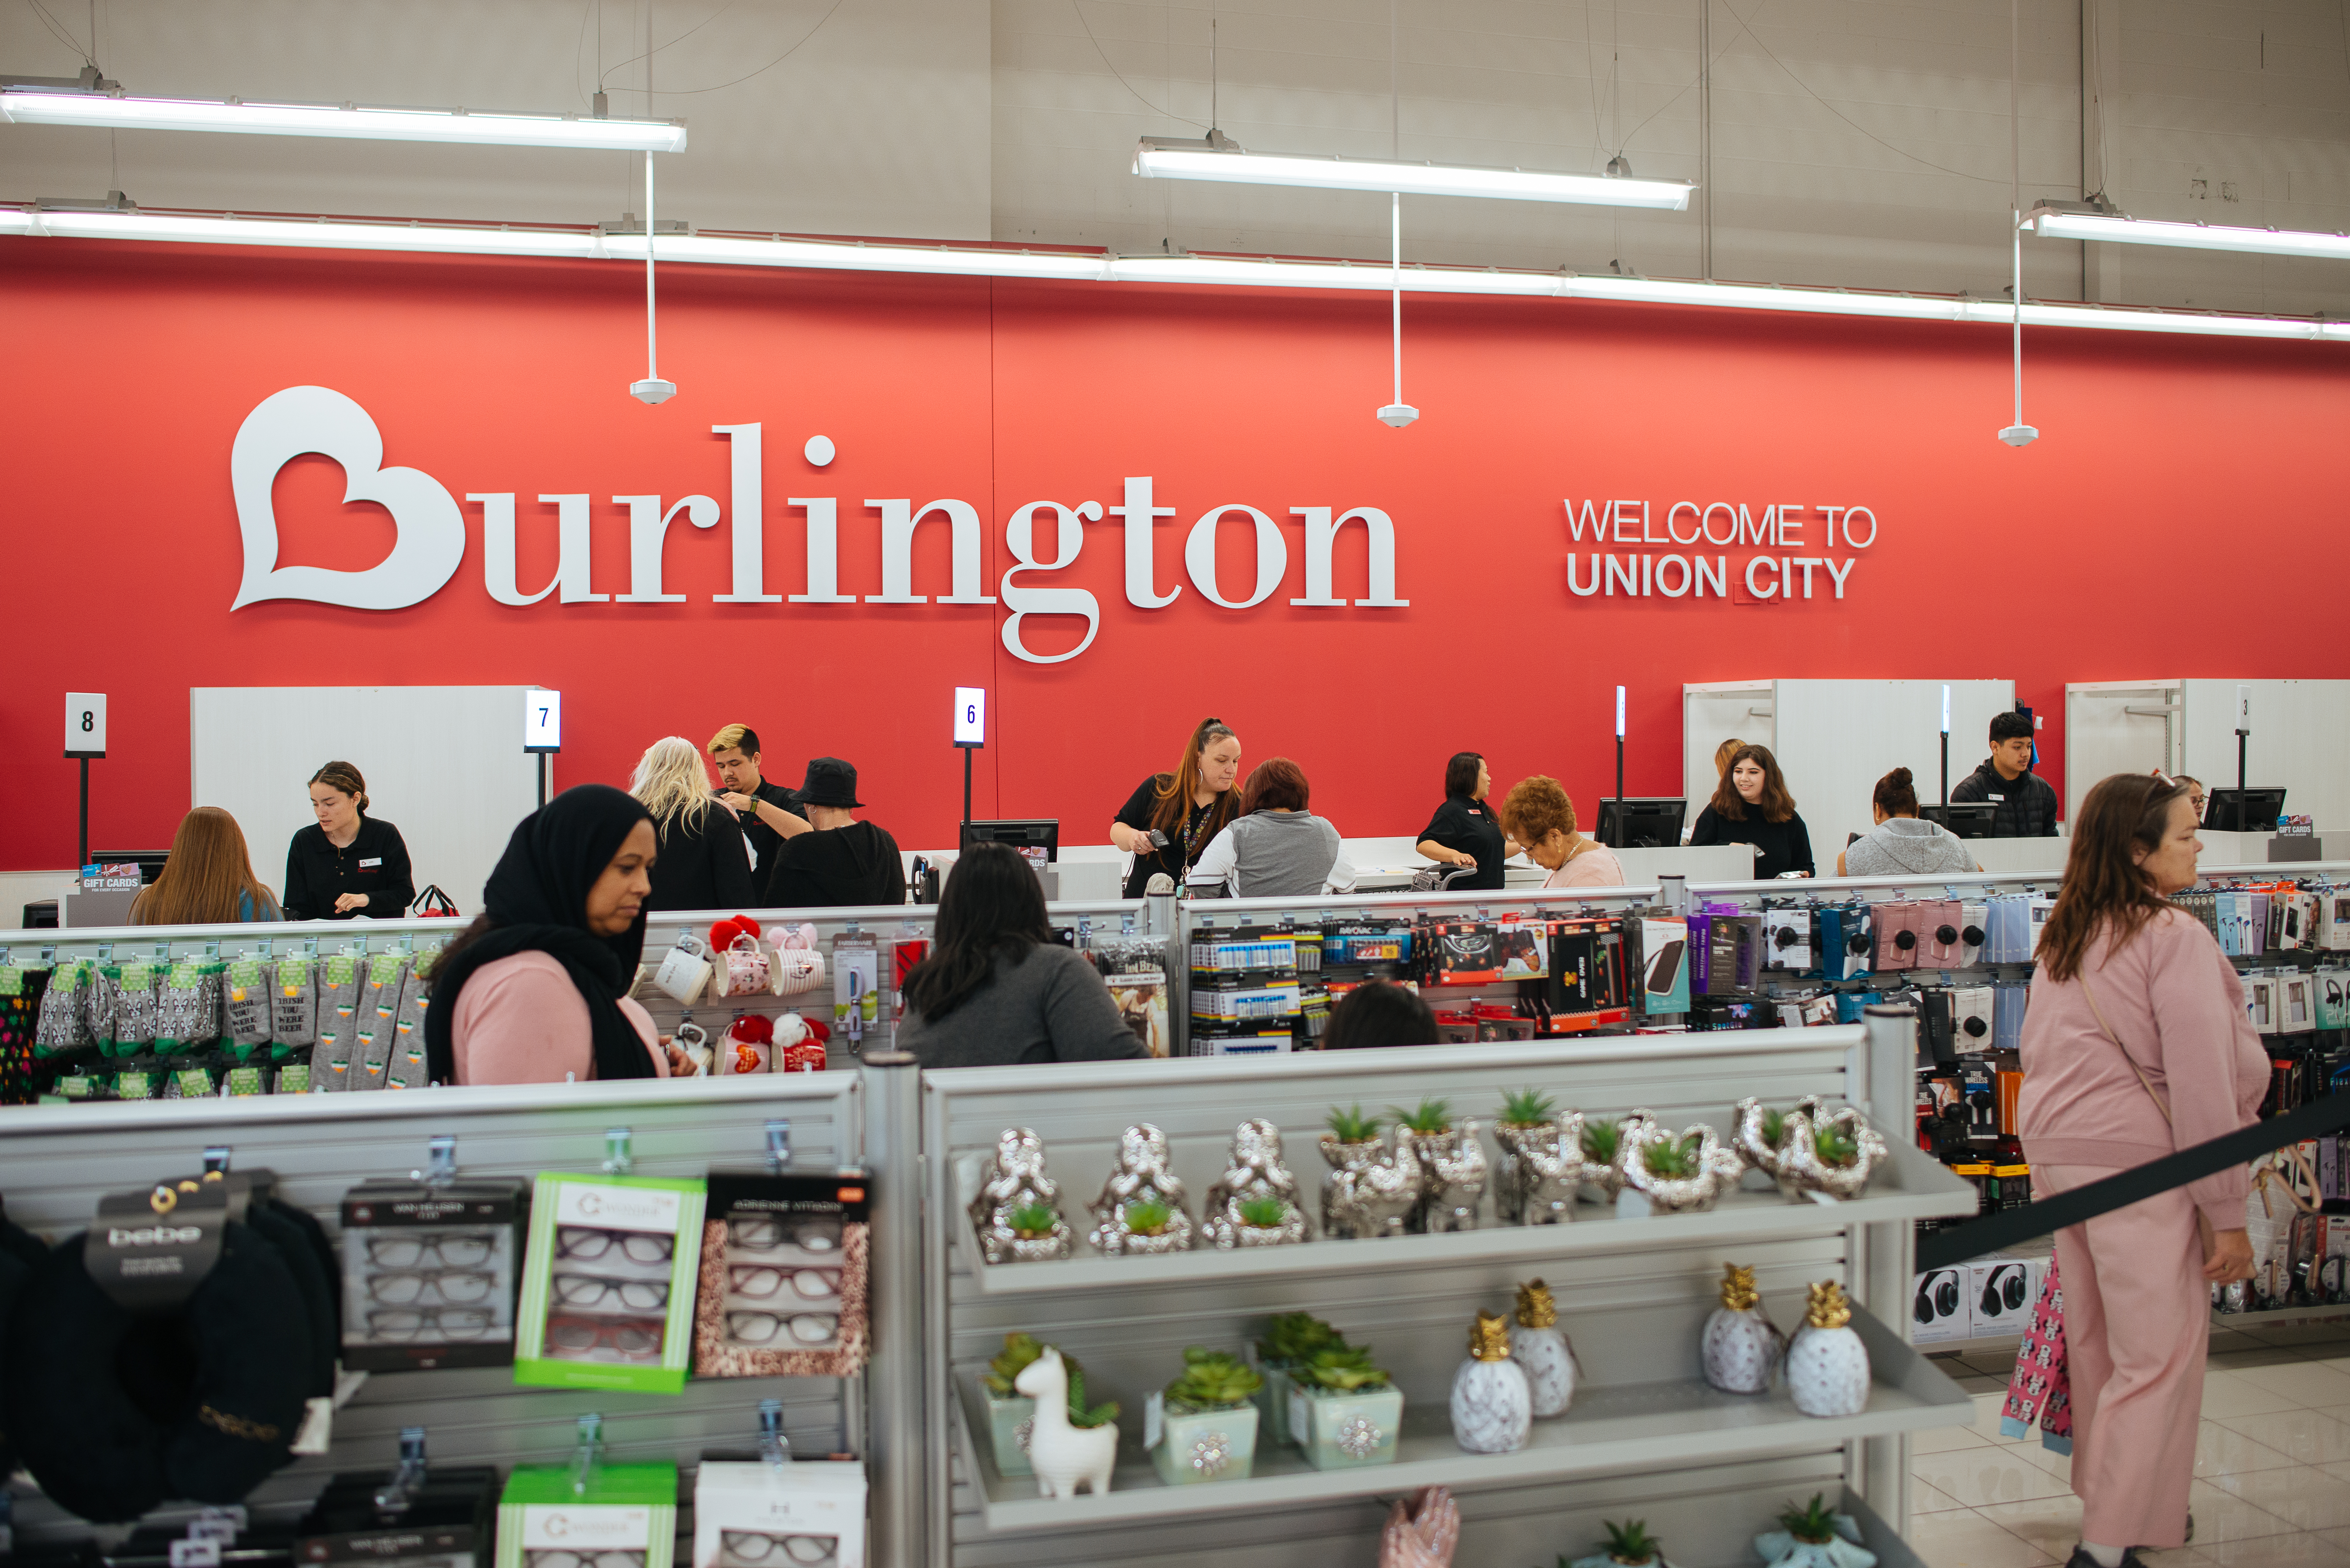 Customers lined up for their purchases at Burlington.